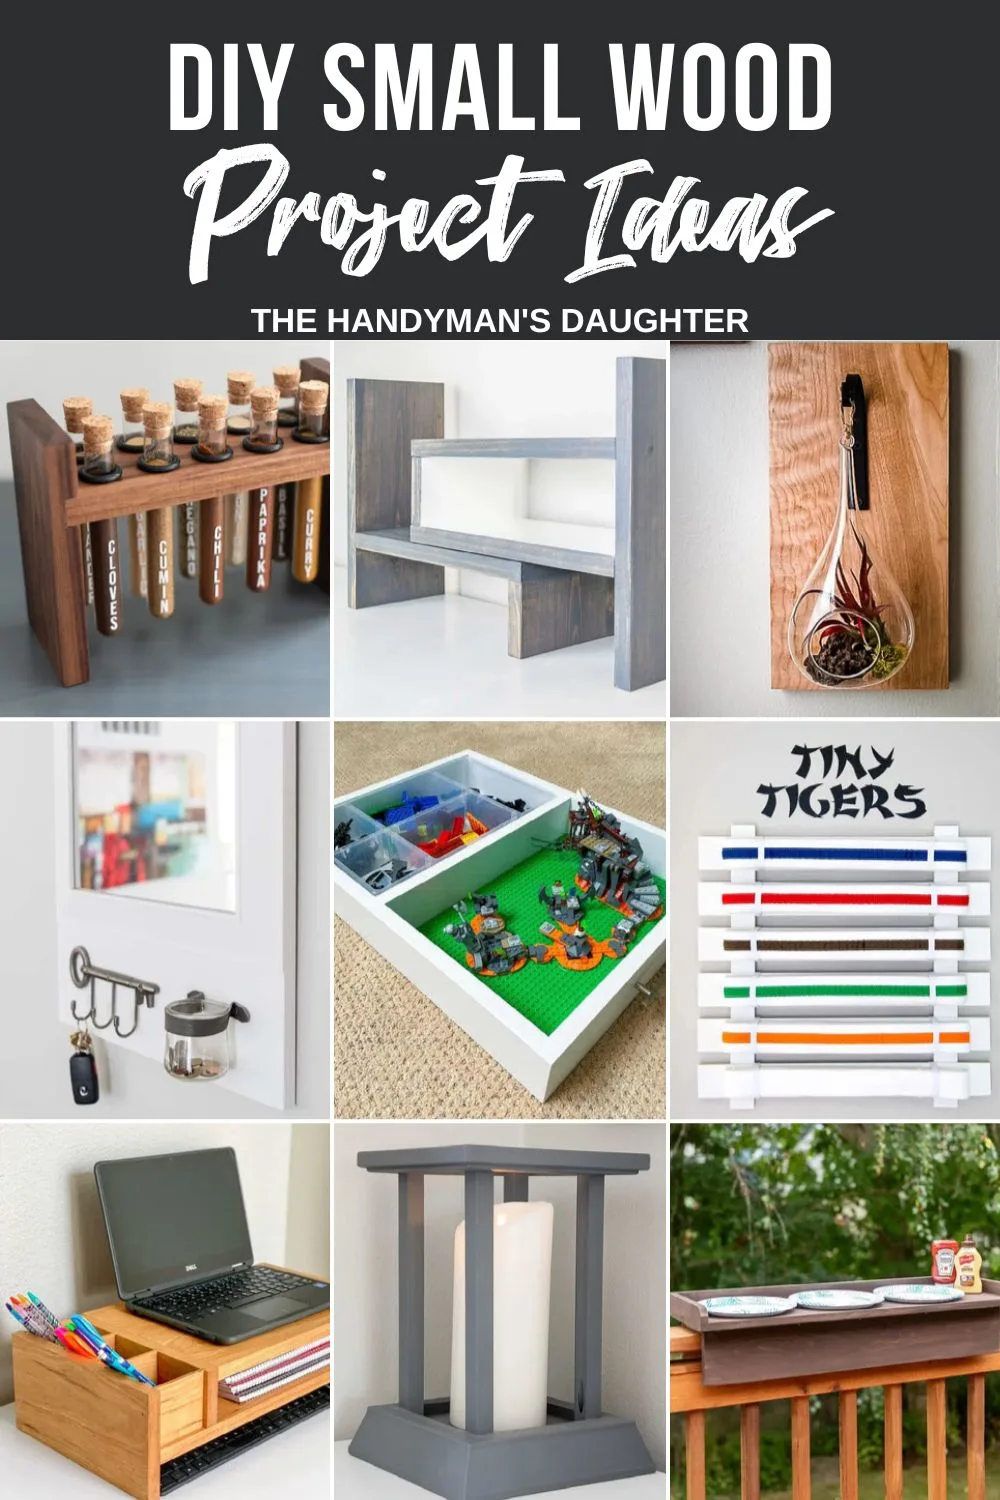 Easy Wood Projects for Kids: Fun & Creative DIY Builds!